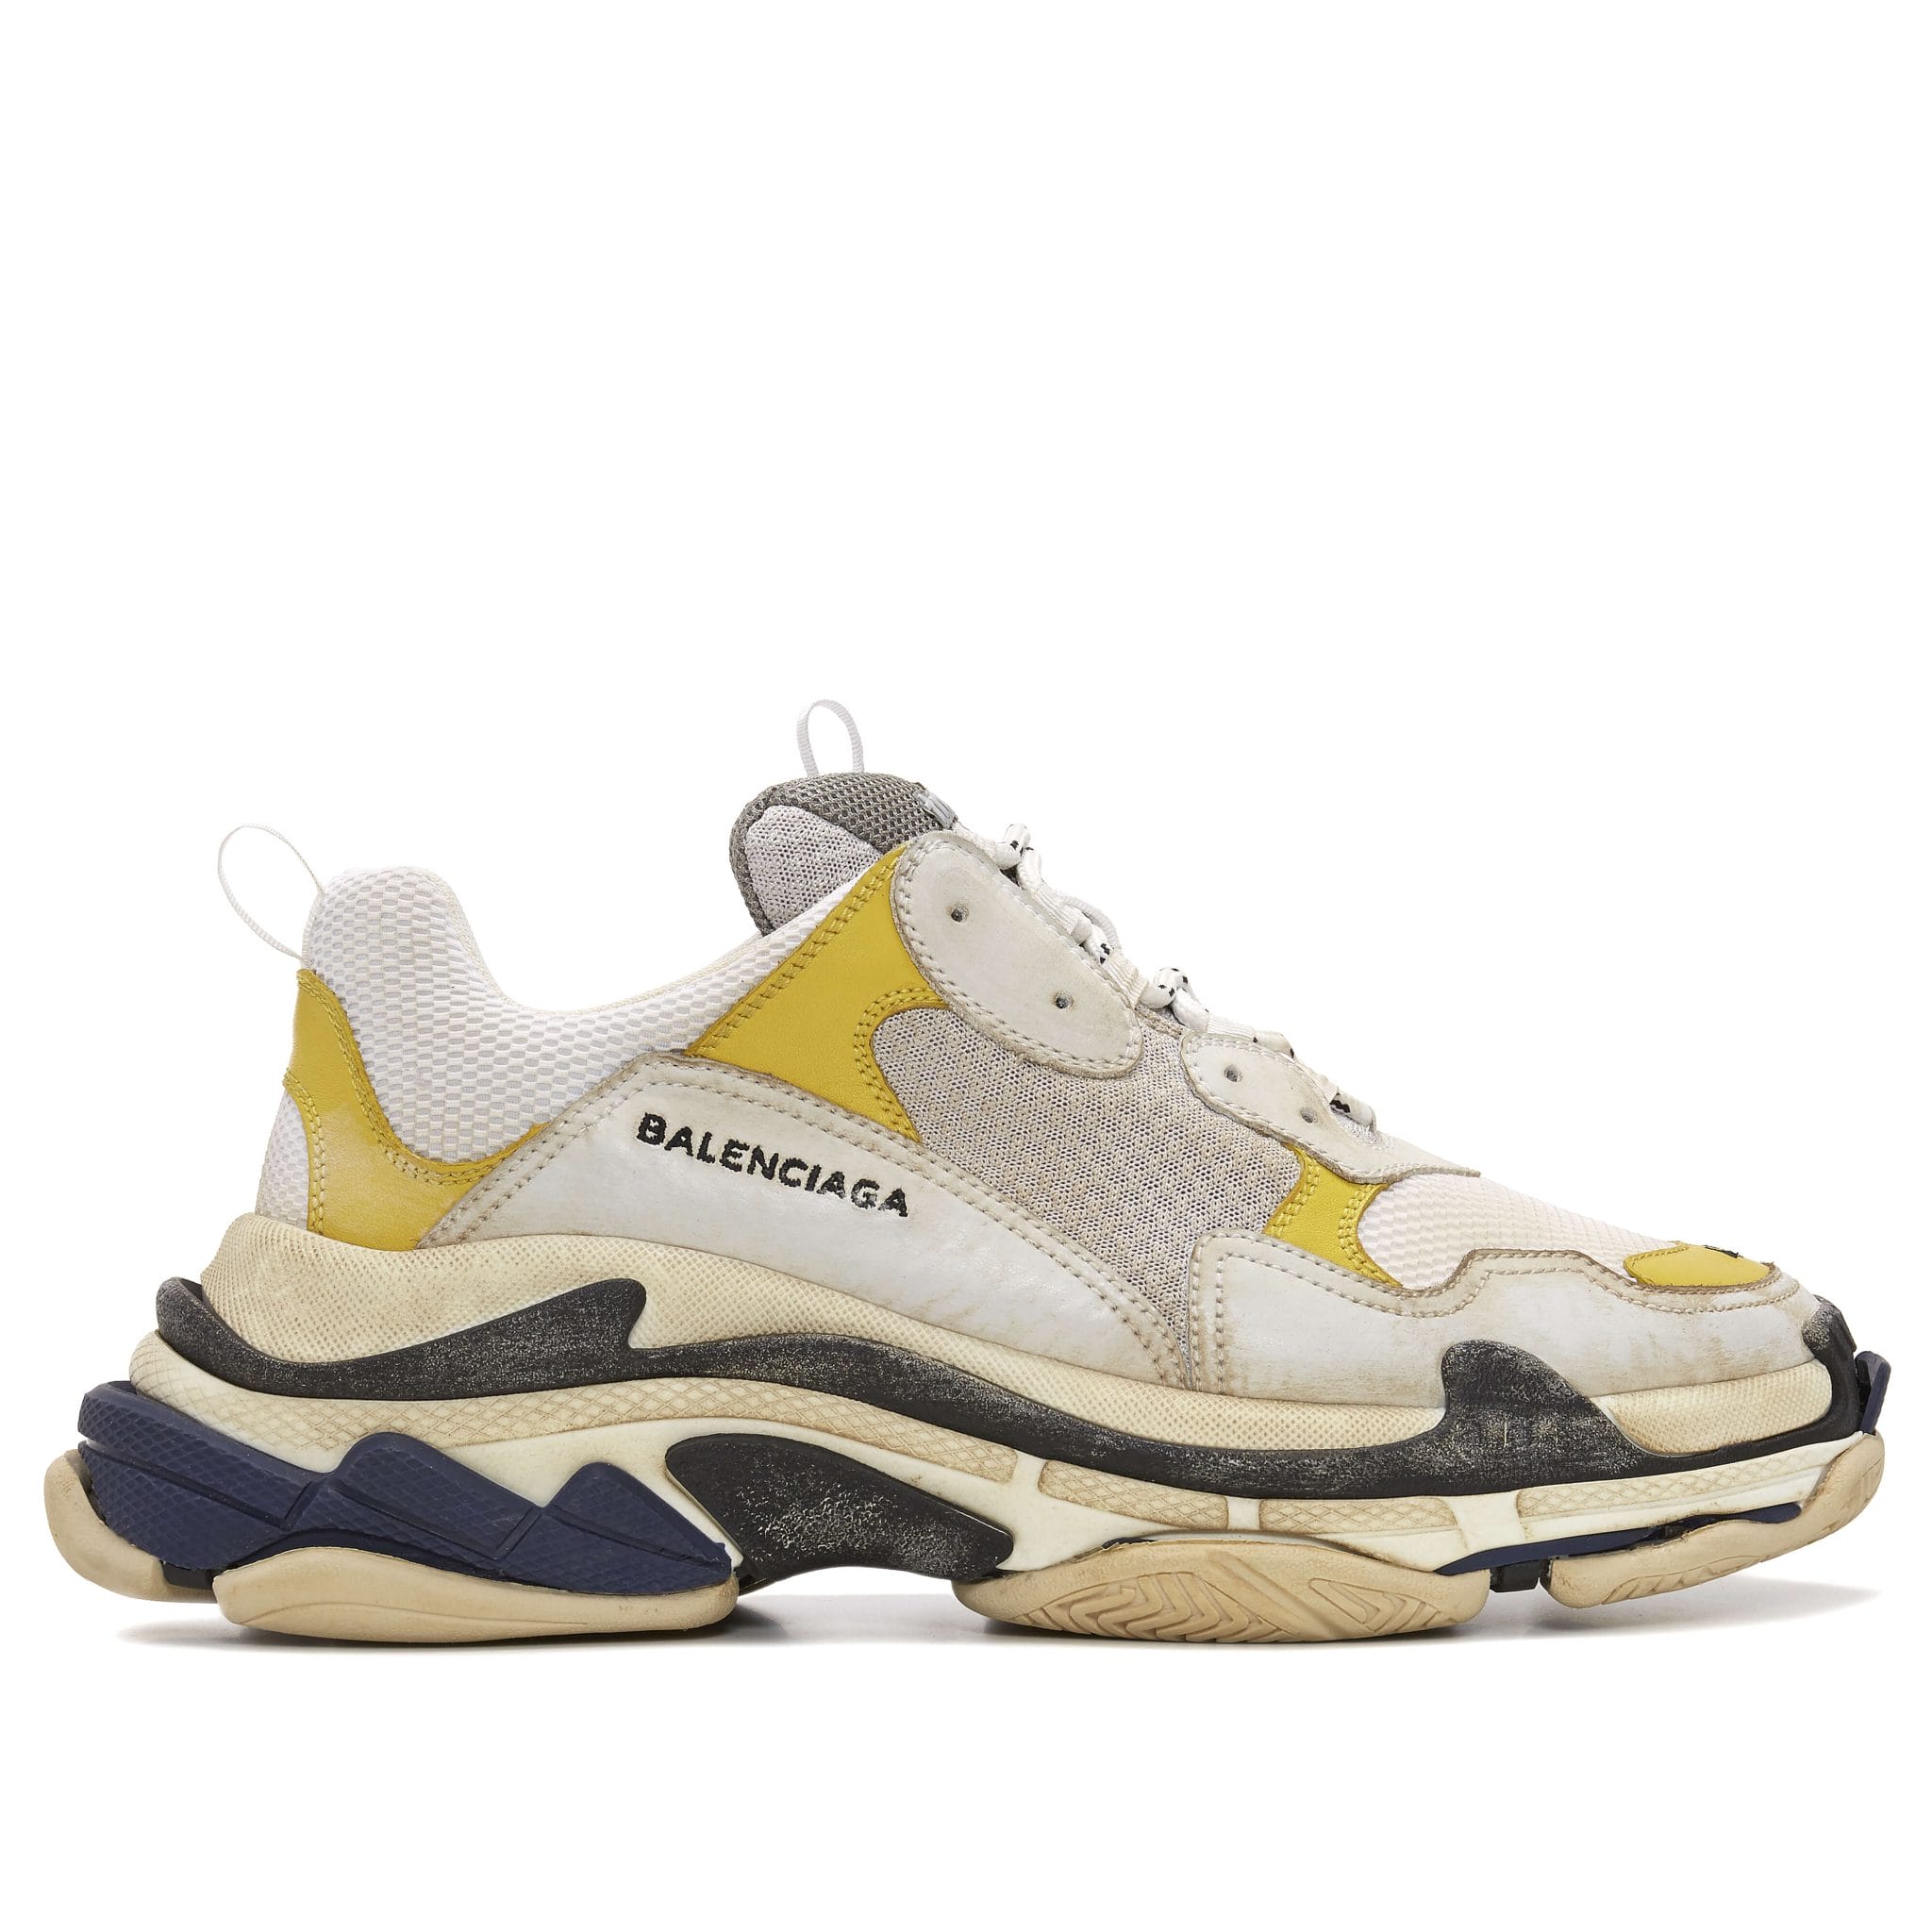 Balenciaga teams up with Dover Market Singapore to release an Triple S colourway - Men's